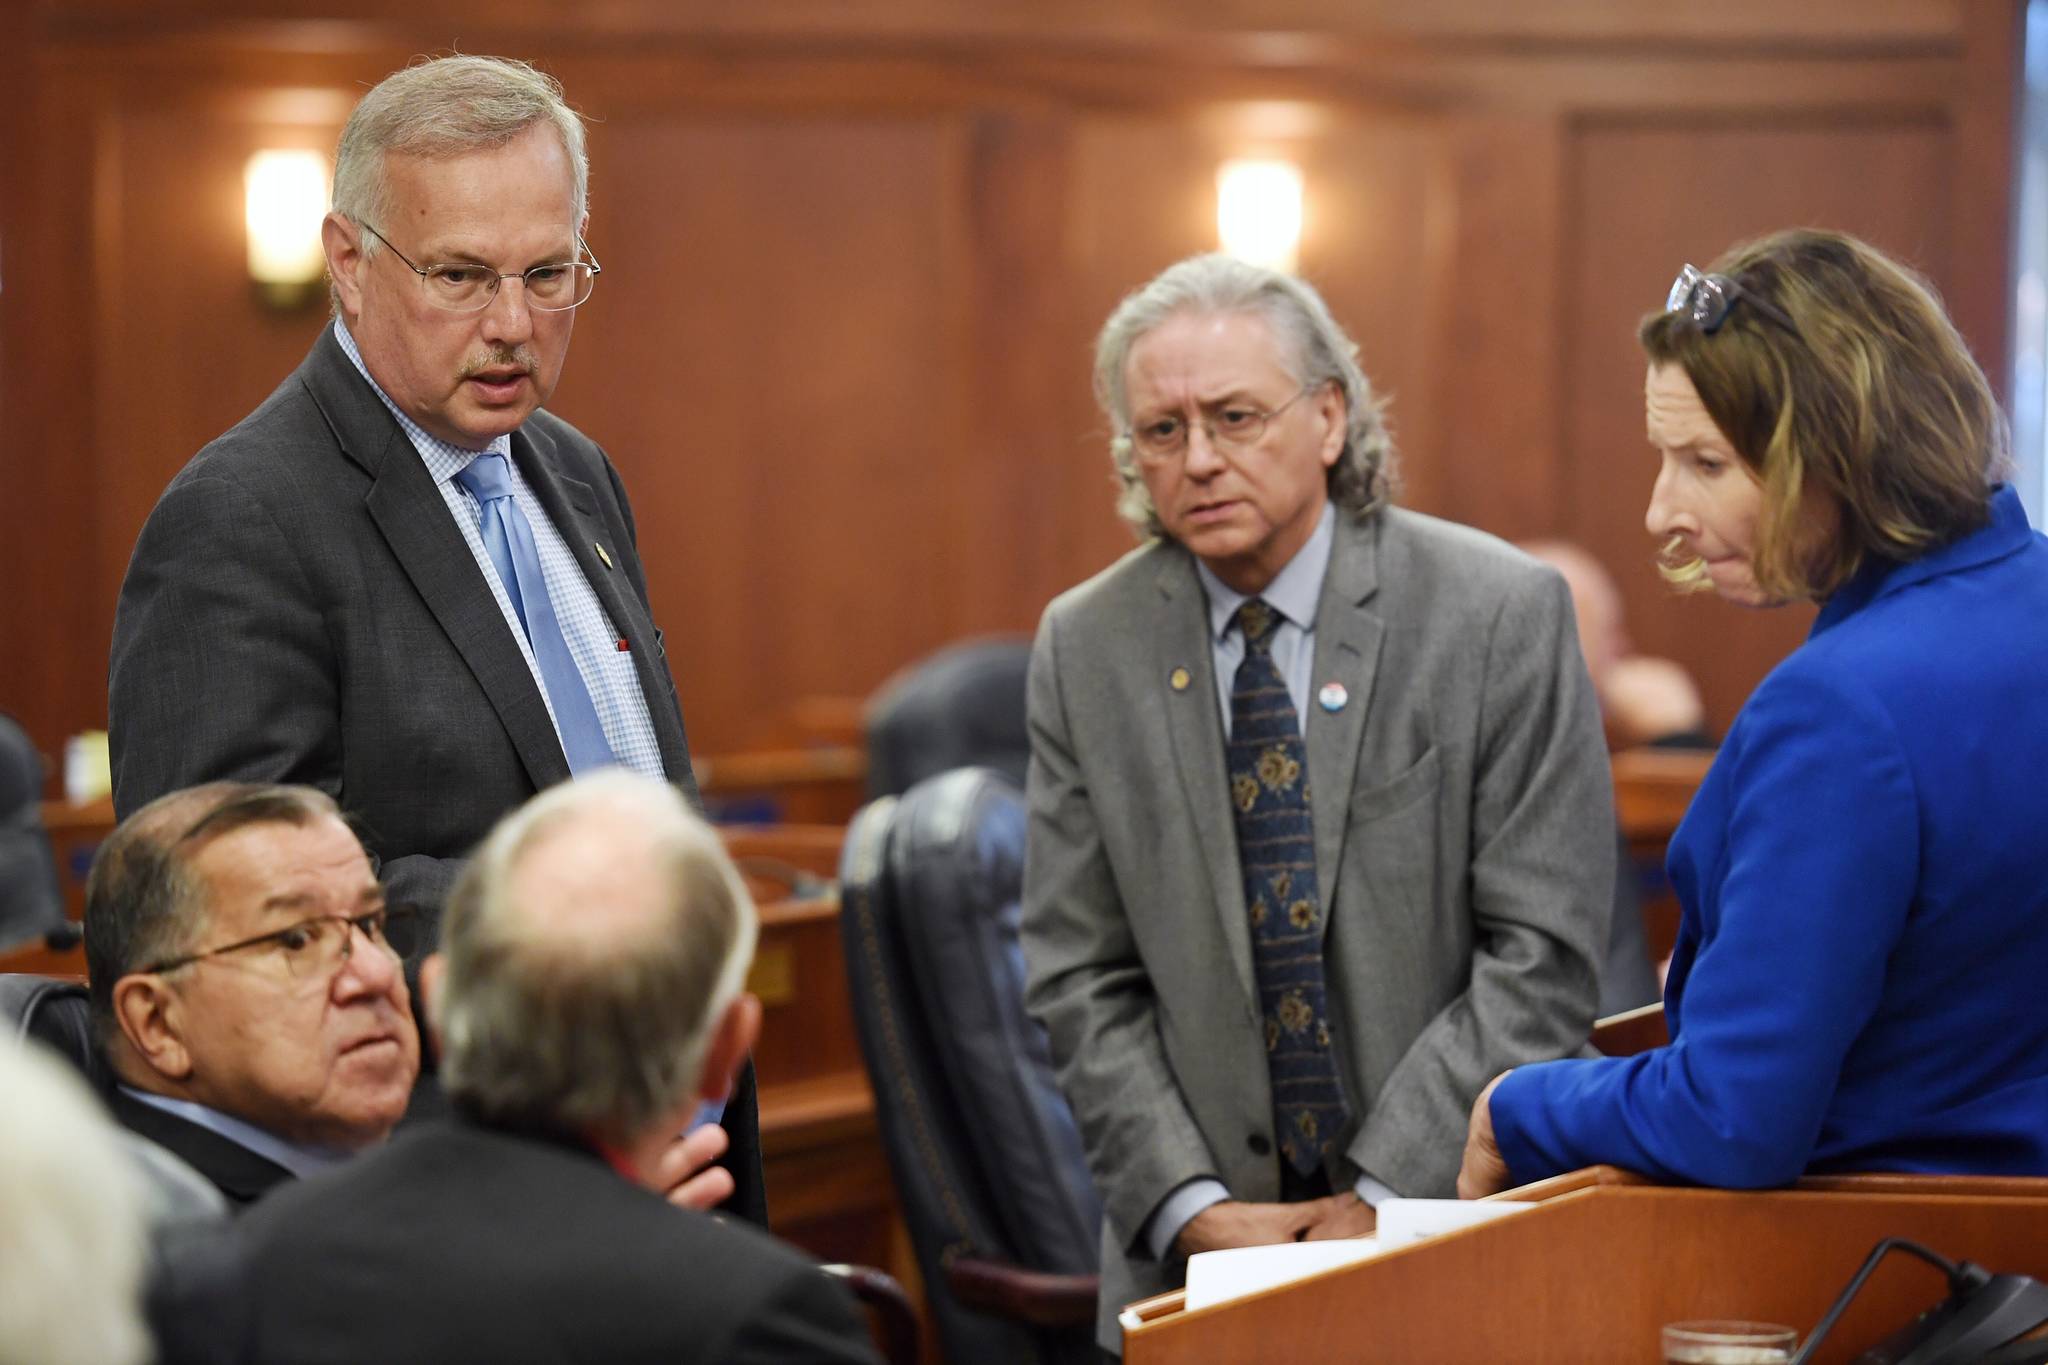 Speaker of the House Rep. Bryce Edgmon, I-Dillingham, left, and Senate President Cathy Giessel, R-Anchorage, right, speaks with Senate and House Leaders during a Joint Session at the Capitol on Wednesday, July 10, 2019. (Michael Penn | Juneau Empire)